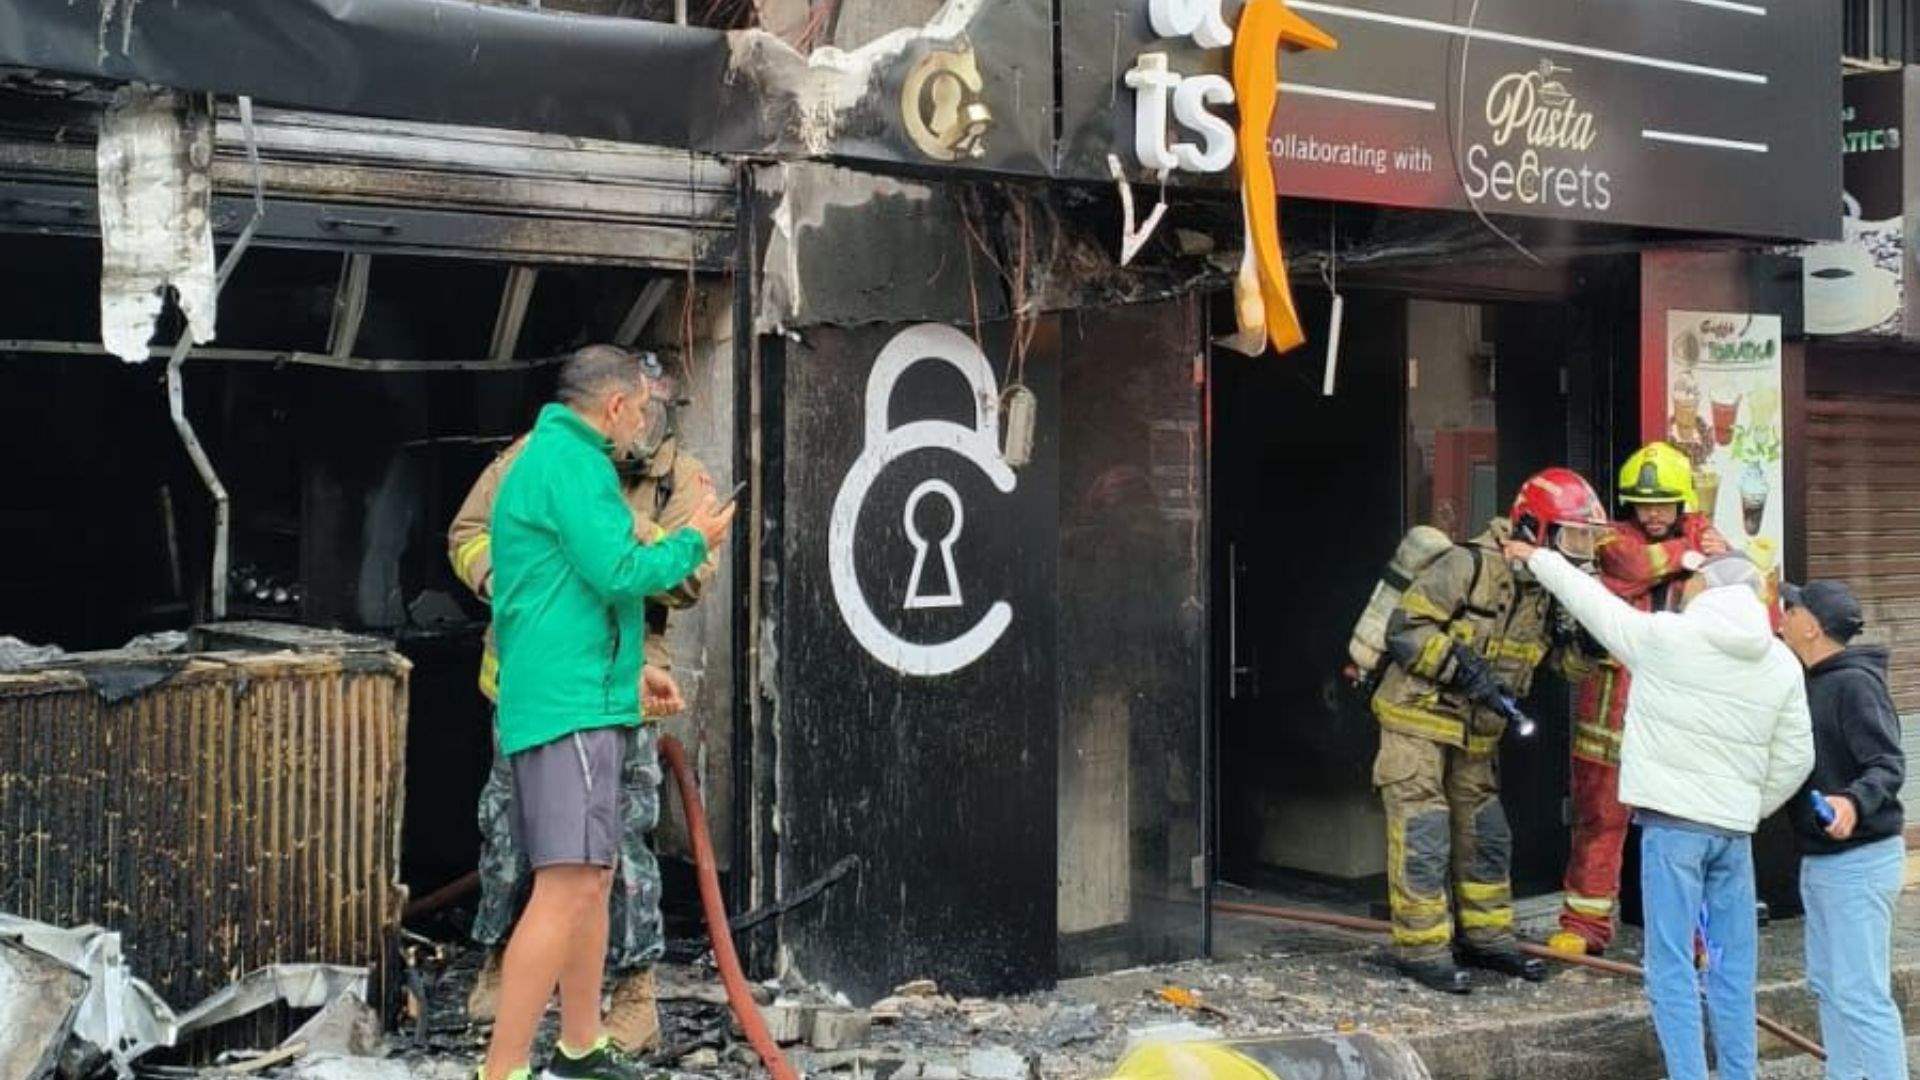 Update: Gas leak in Beirut restaurant leads to fatal fire - Here are the details